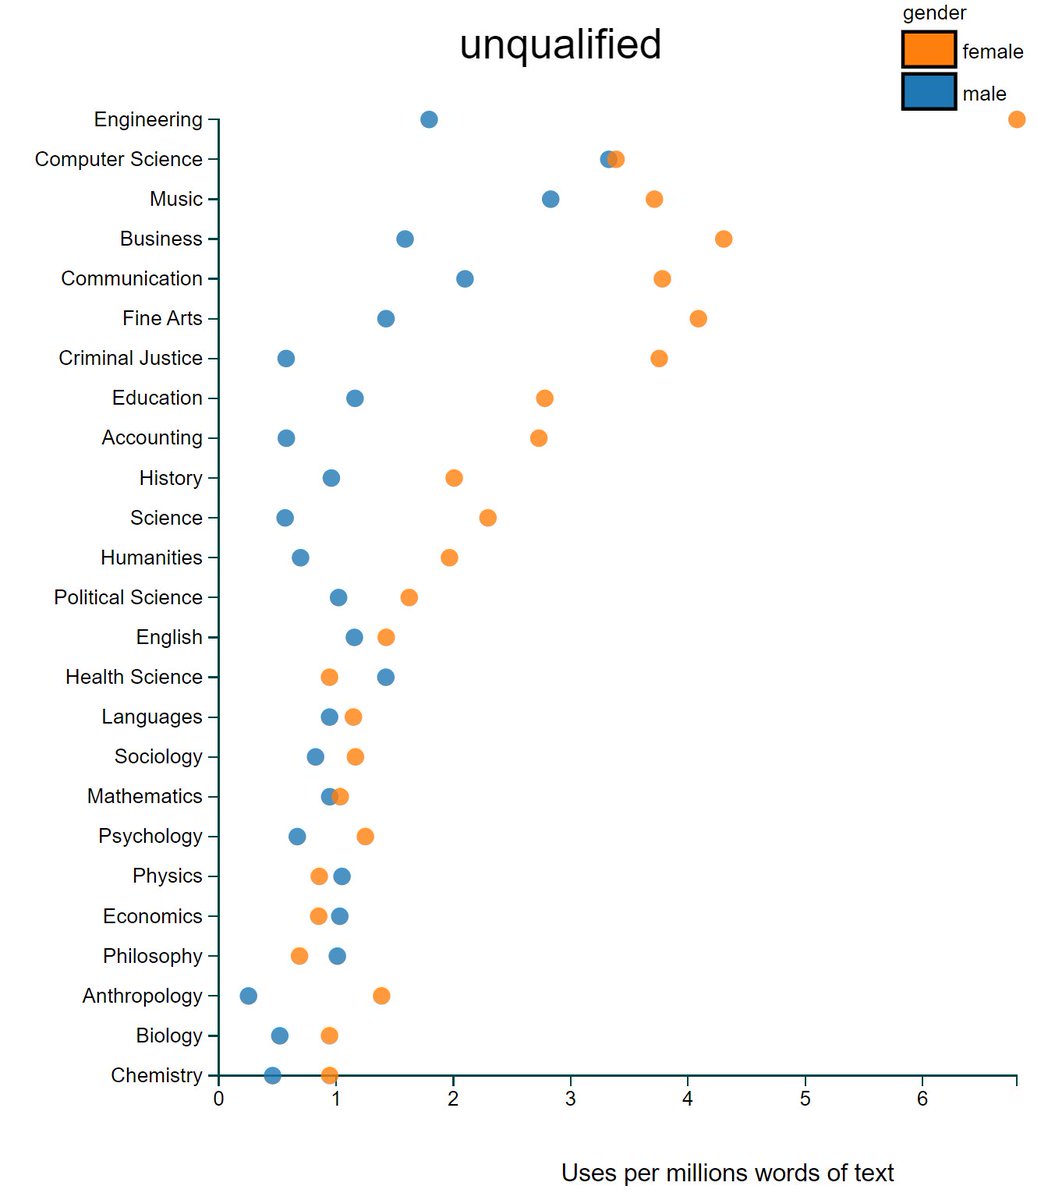 This shows frequency of the word 'unqualified' in teaching reviews. Women in orange, men in blue.